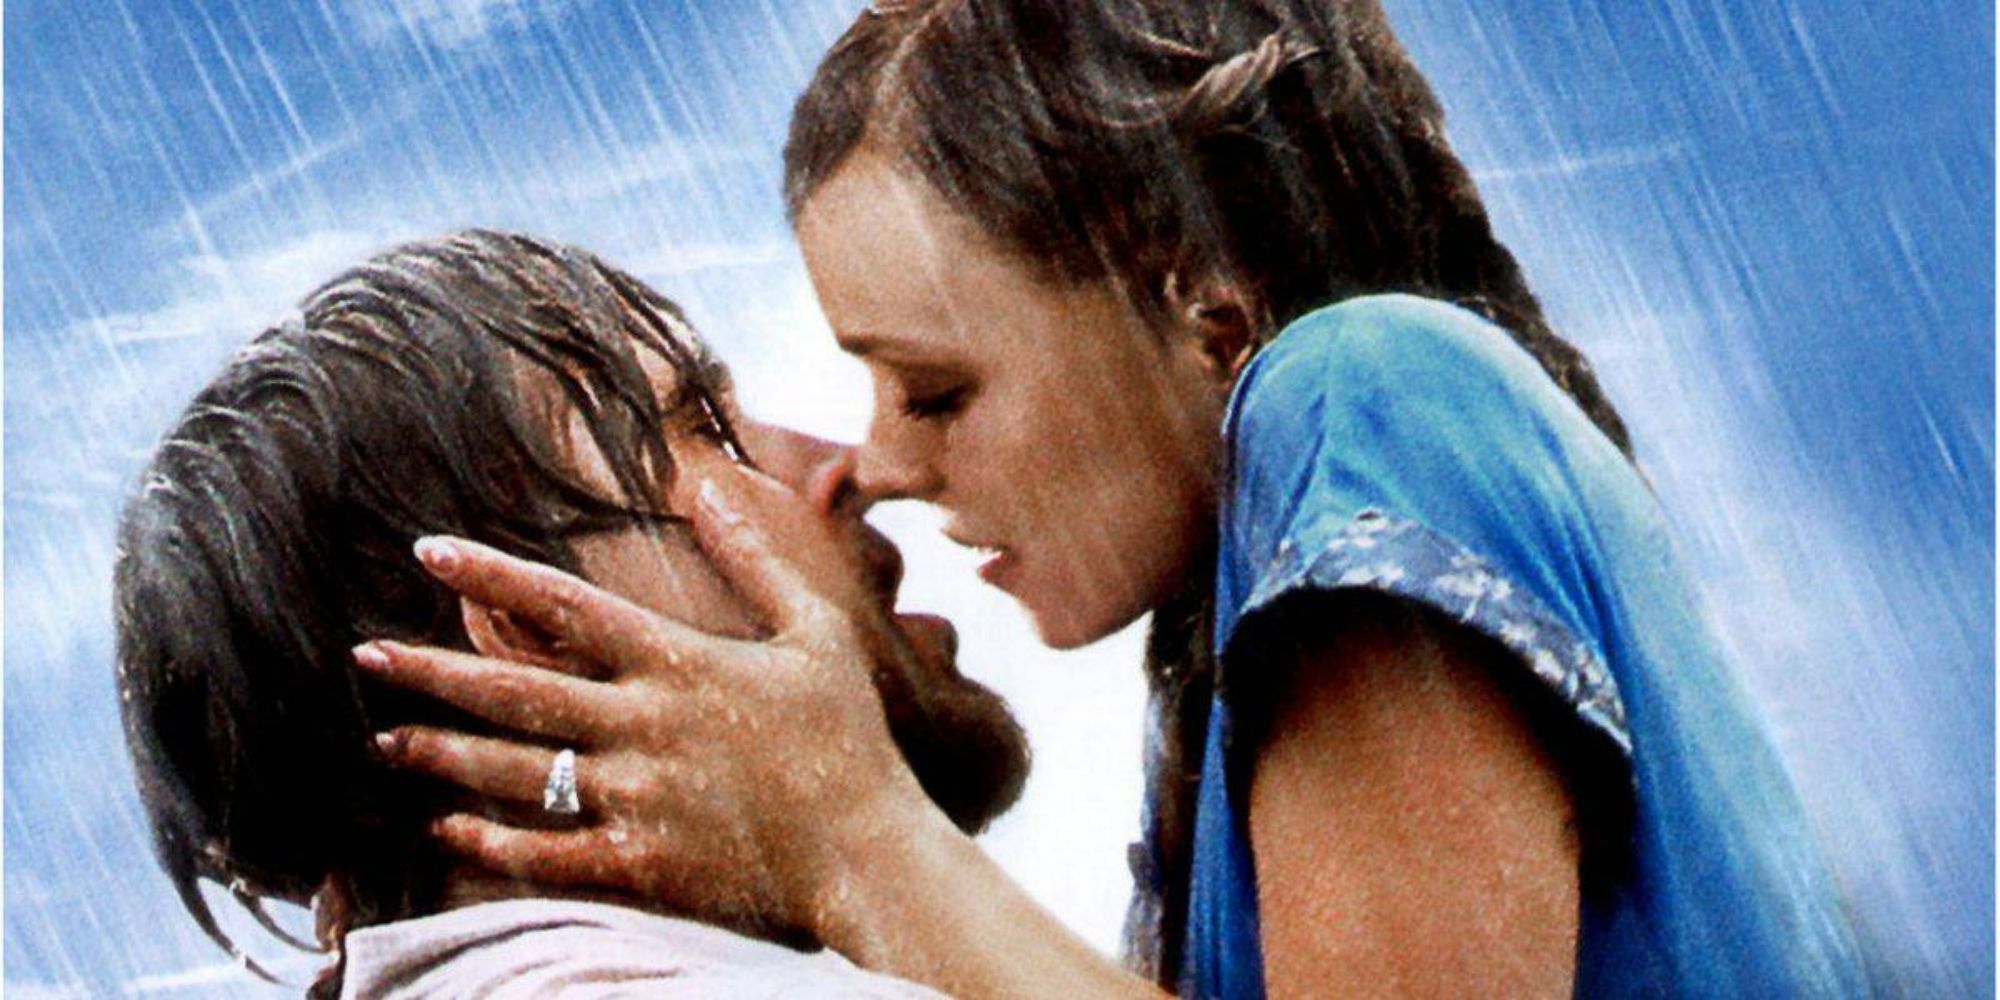 The poster from The Notebook.